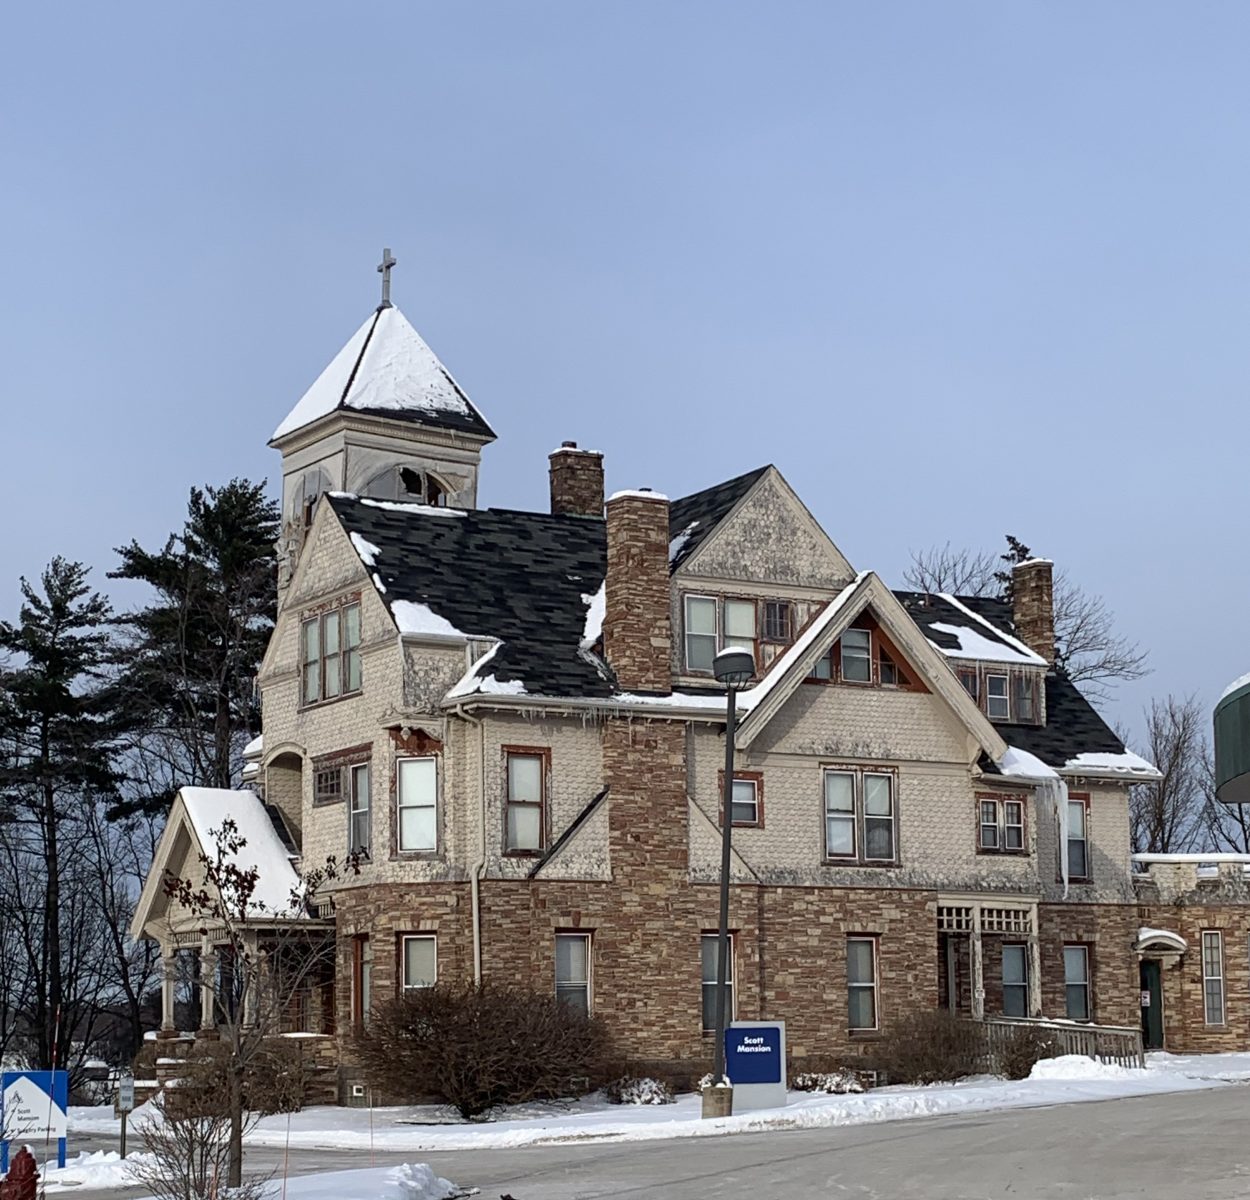 Petition circulating to save T.B. Scott Mansion from demolition